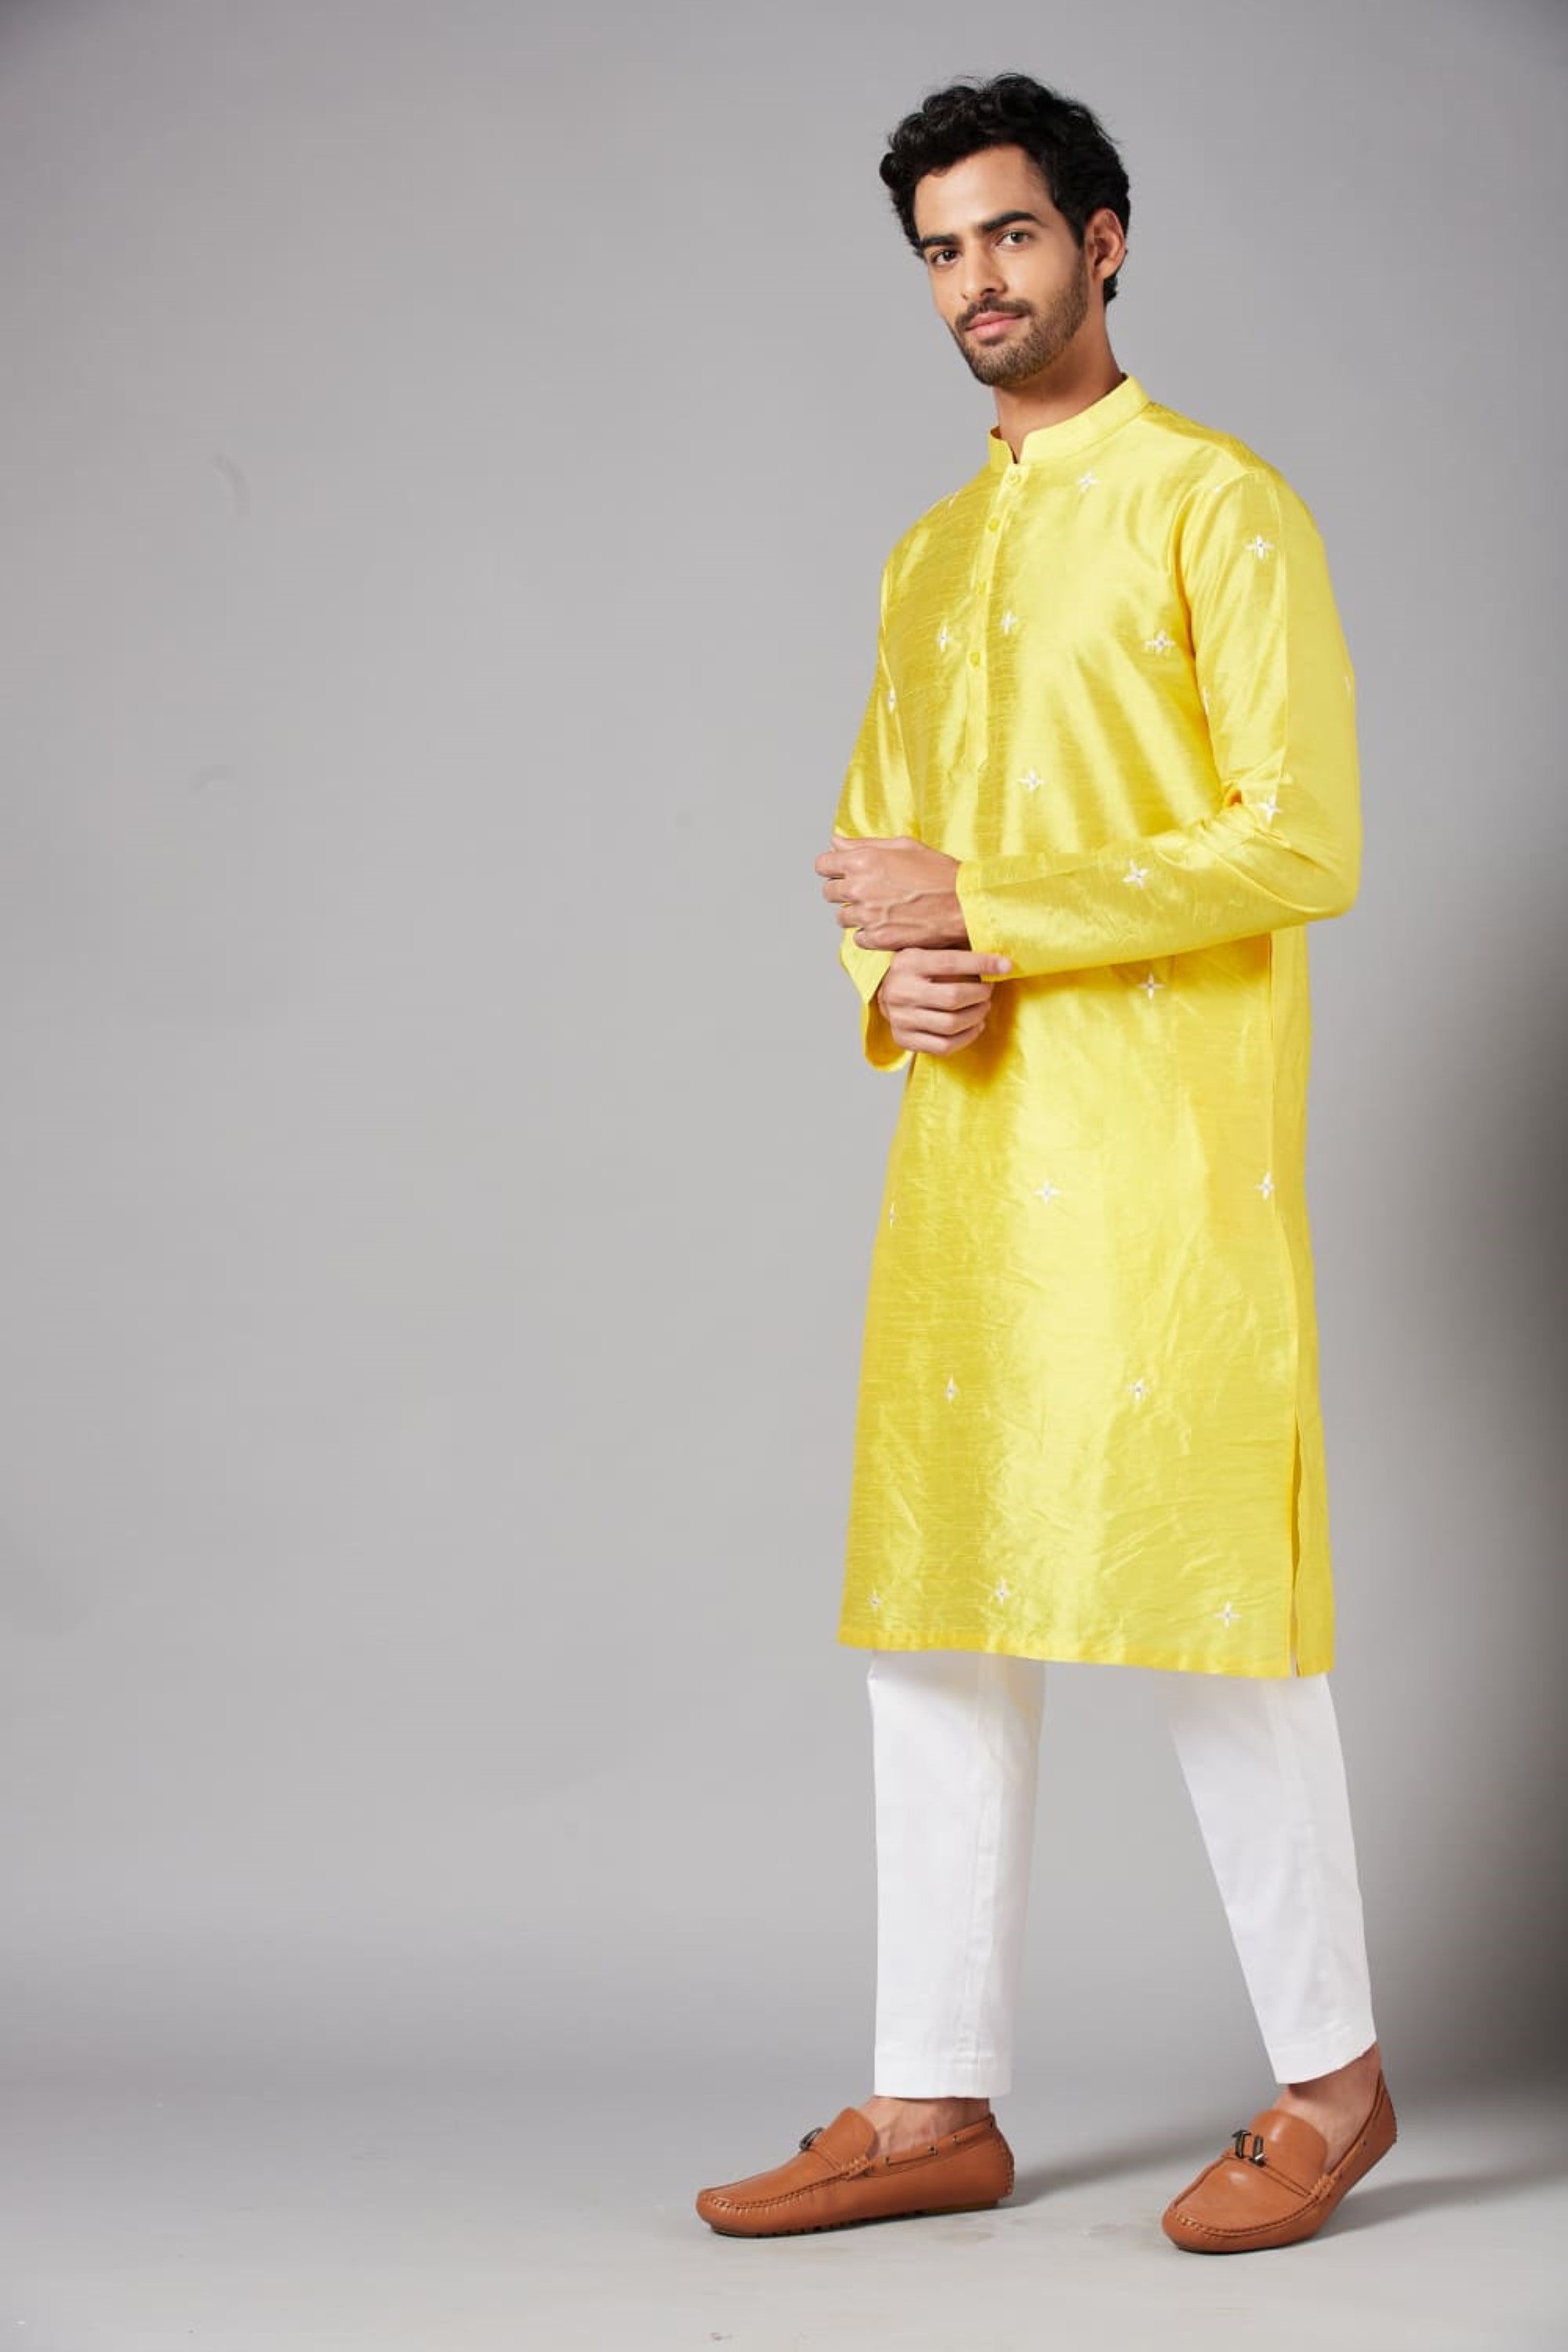 Men's Yellow Color Saanjh Yellow Embroidered Kurta With Mirror Details Cotton - Hilo Design